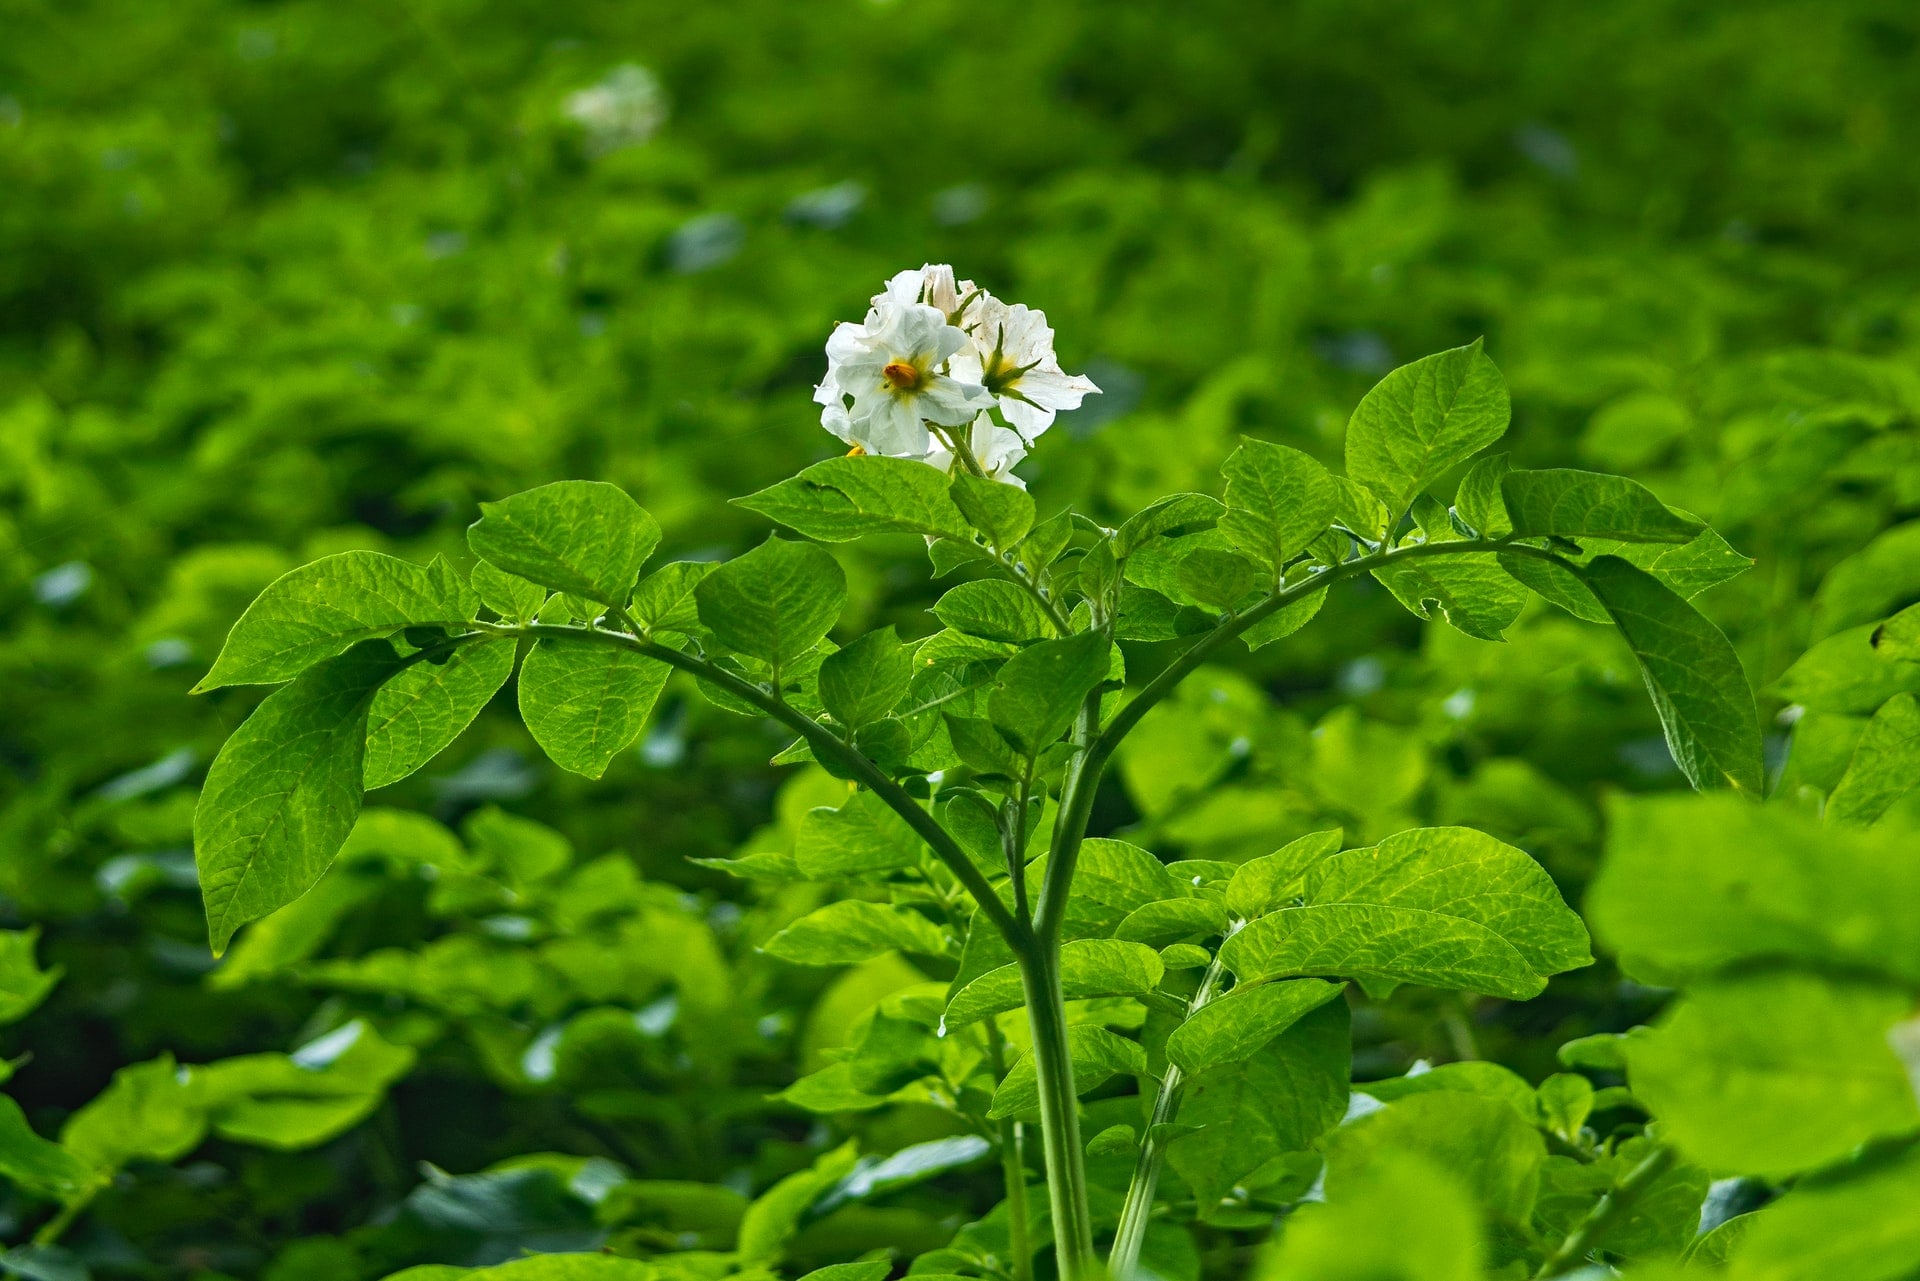 Do Potato Plants have to bloom to produce potatoes?